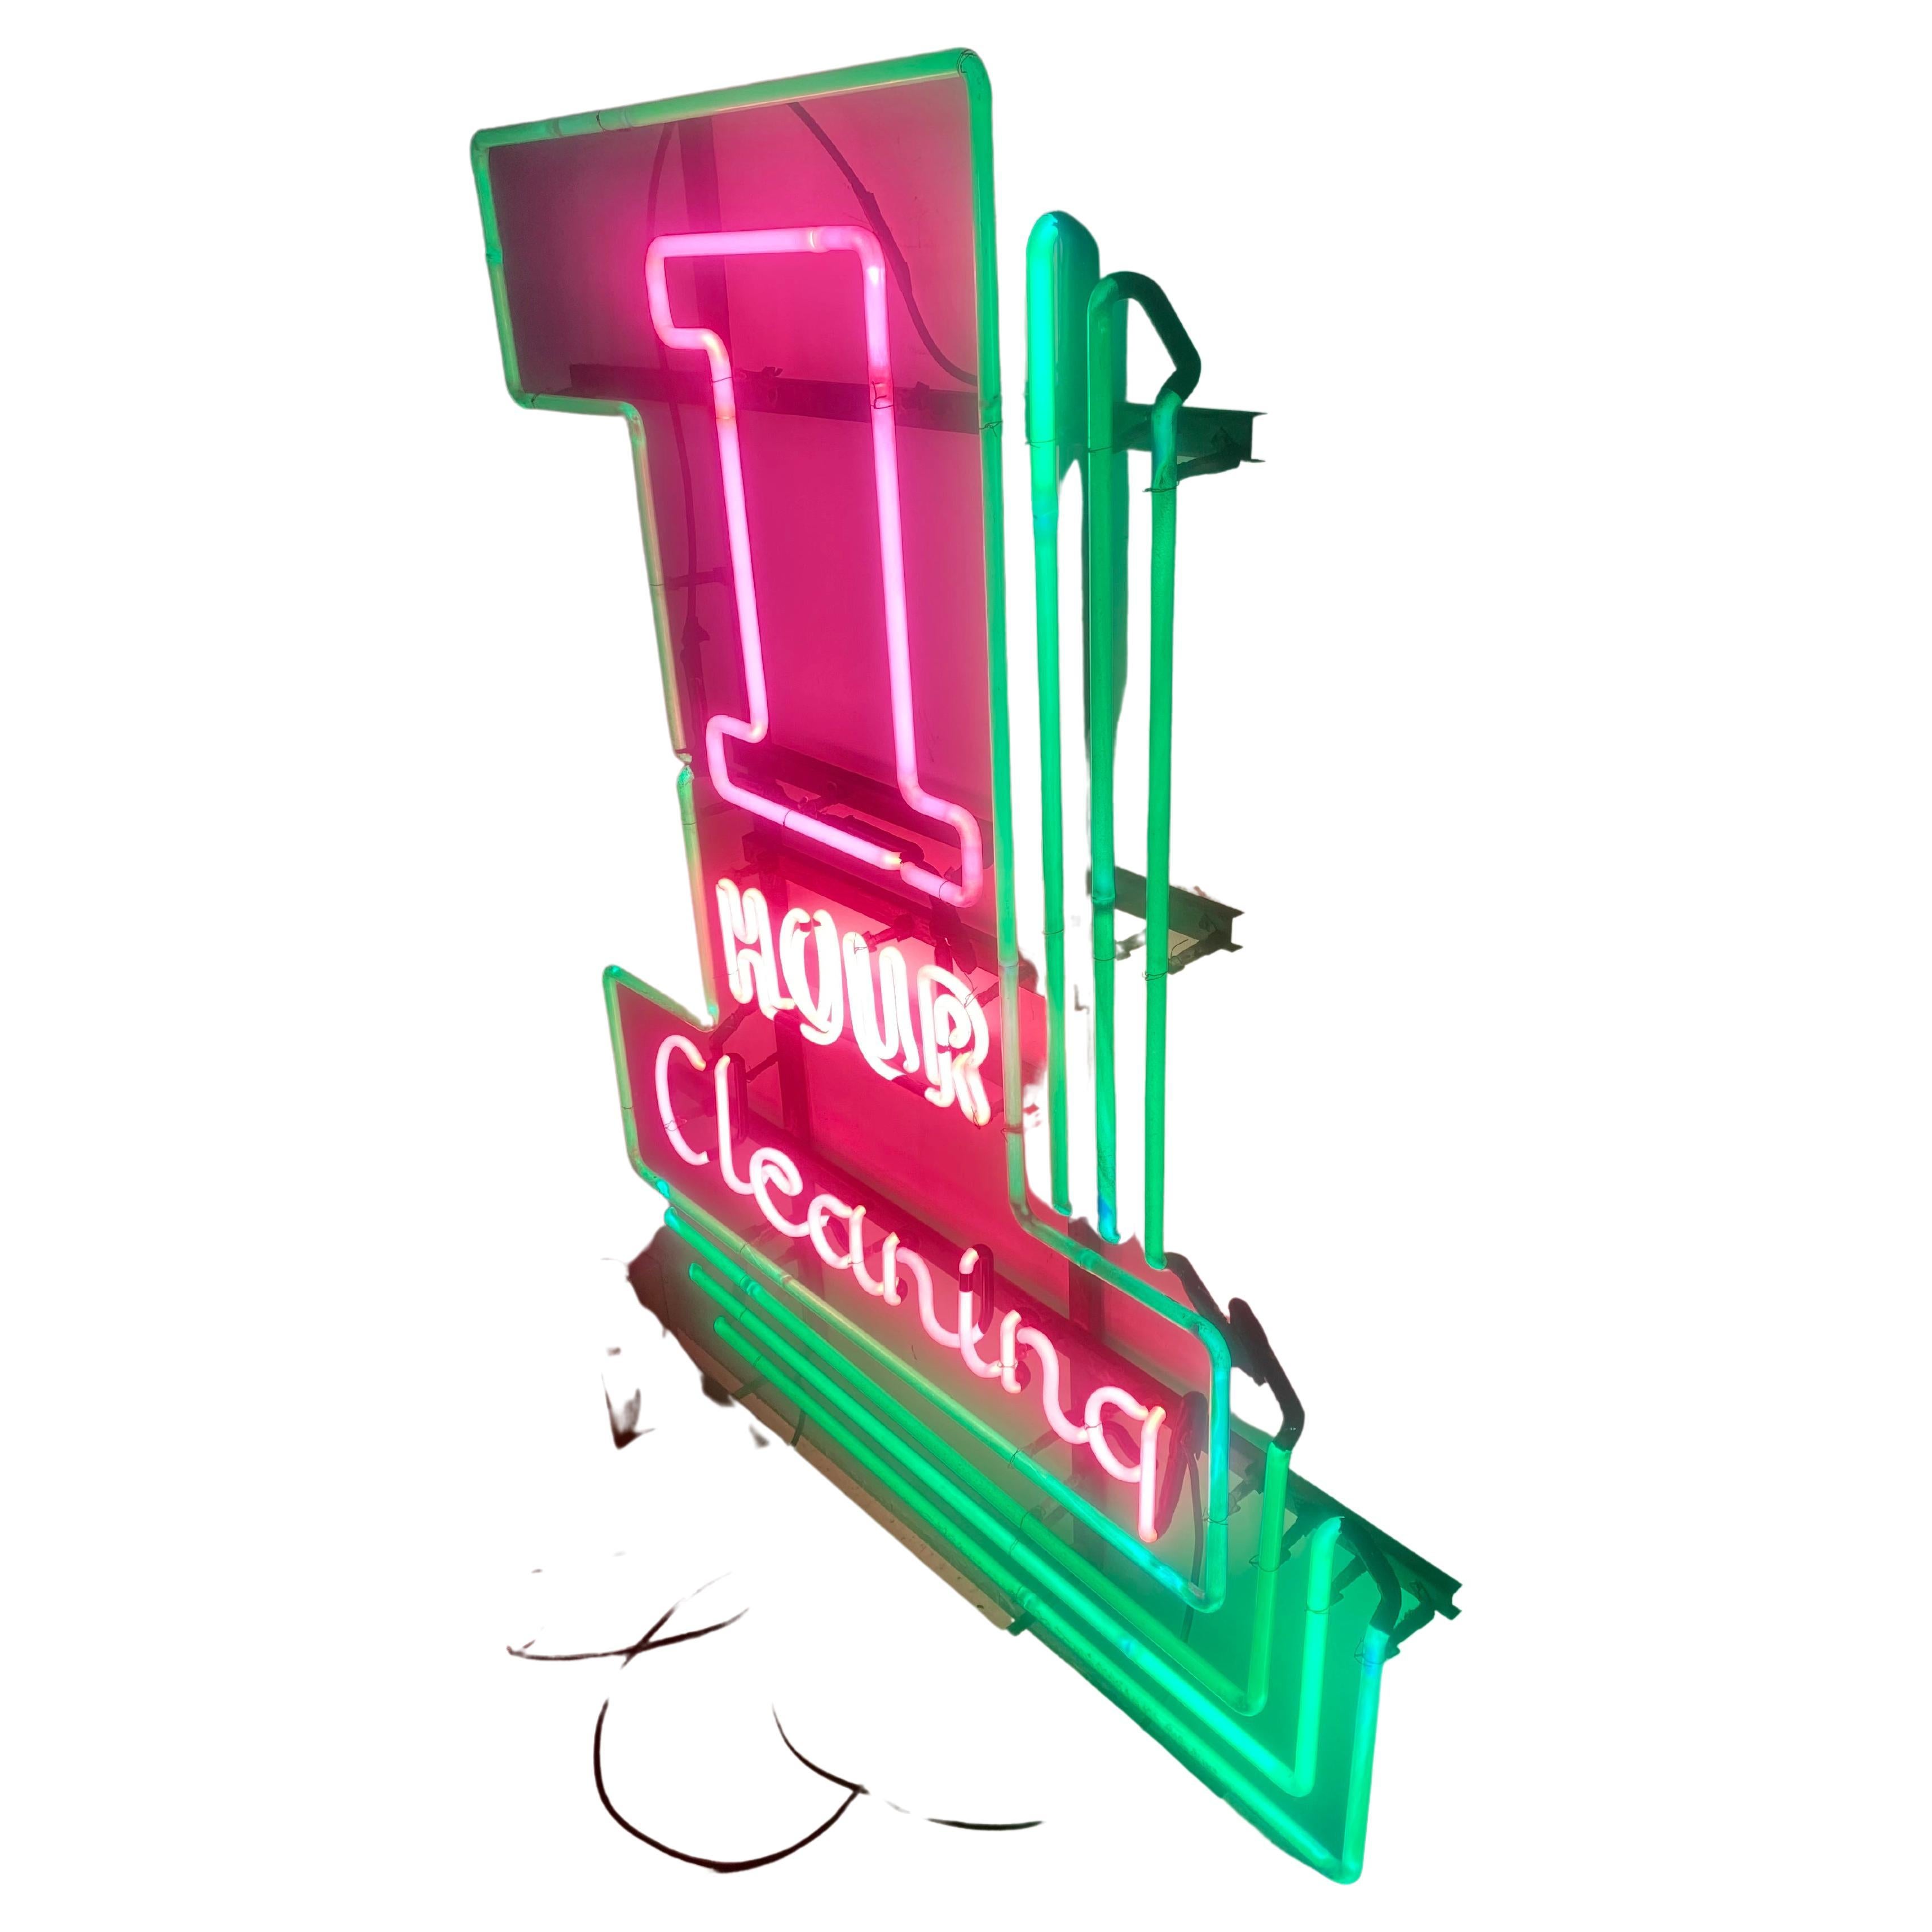 Amazing 1940s-50s Neon Sign "1 Hour Cleaners" Modernist / Art Deco